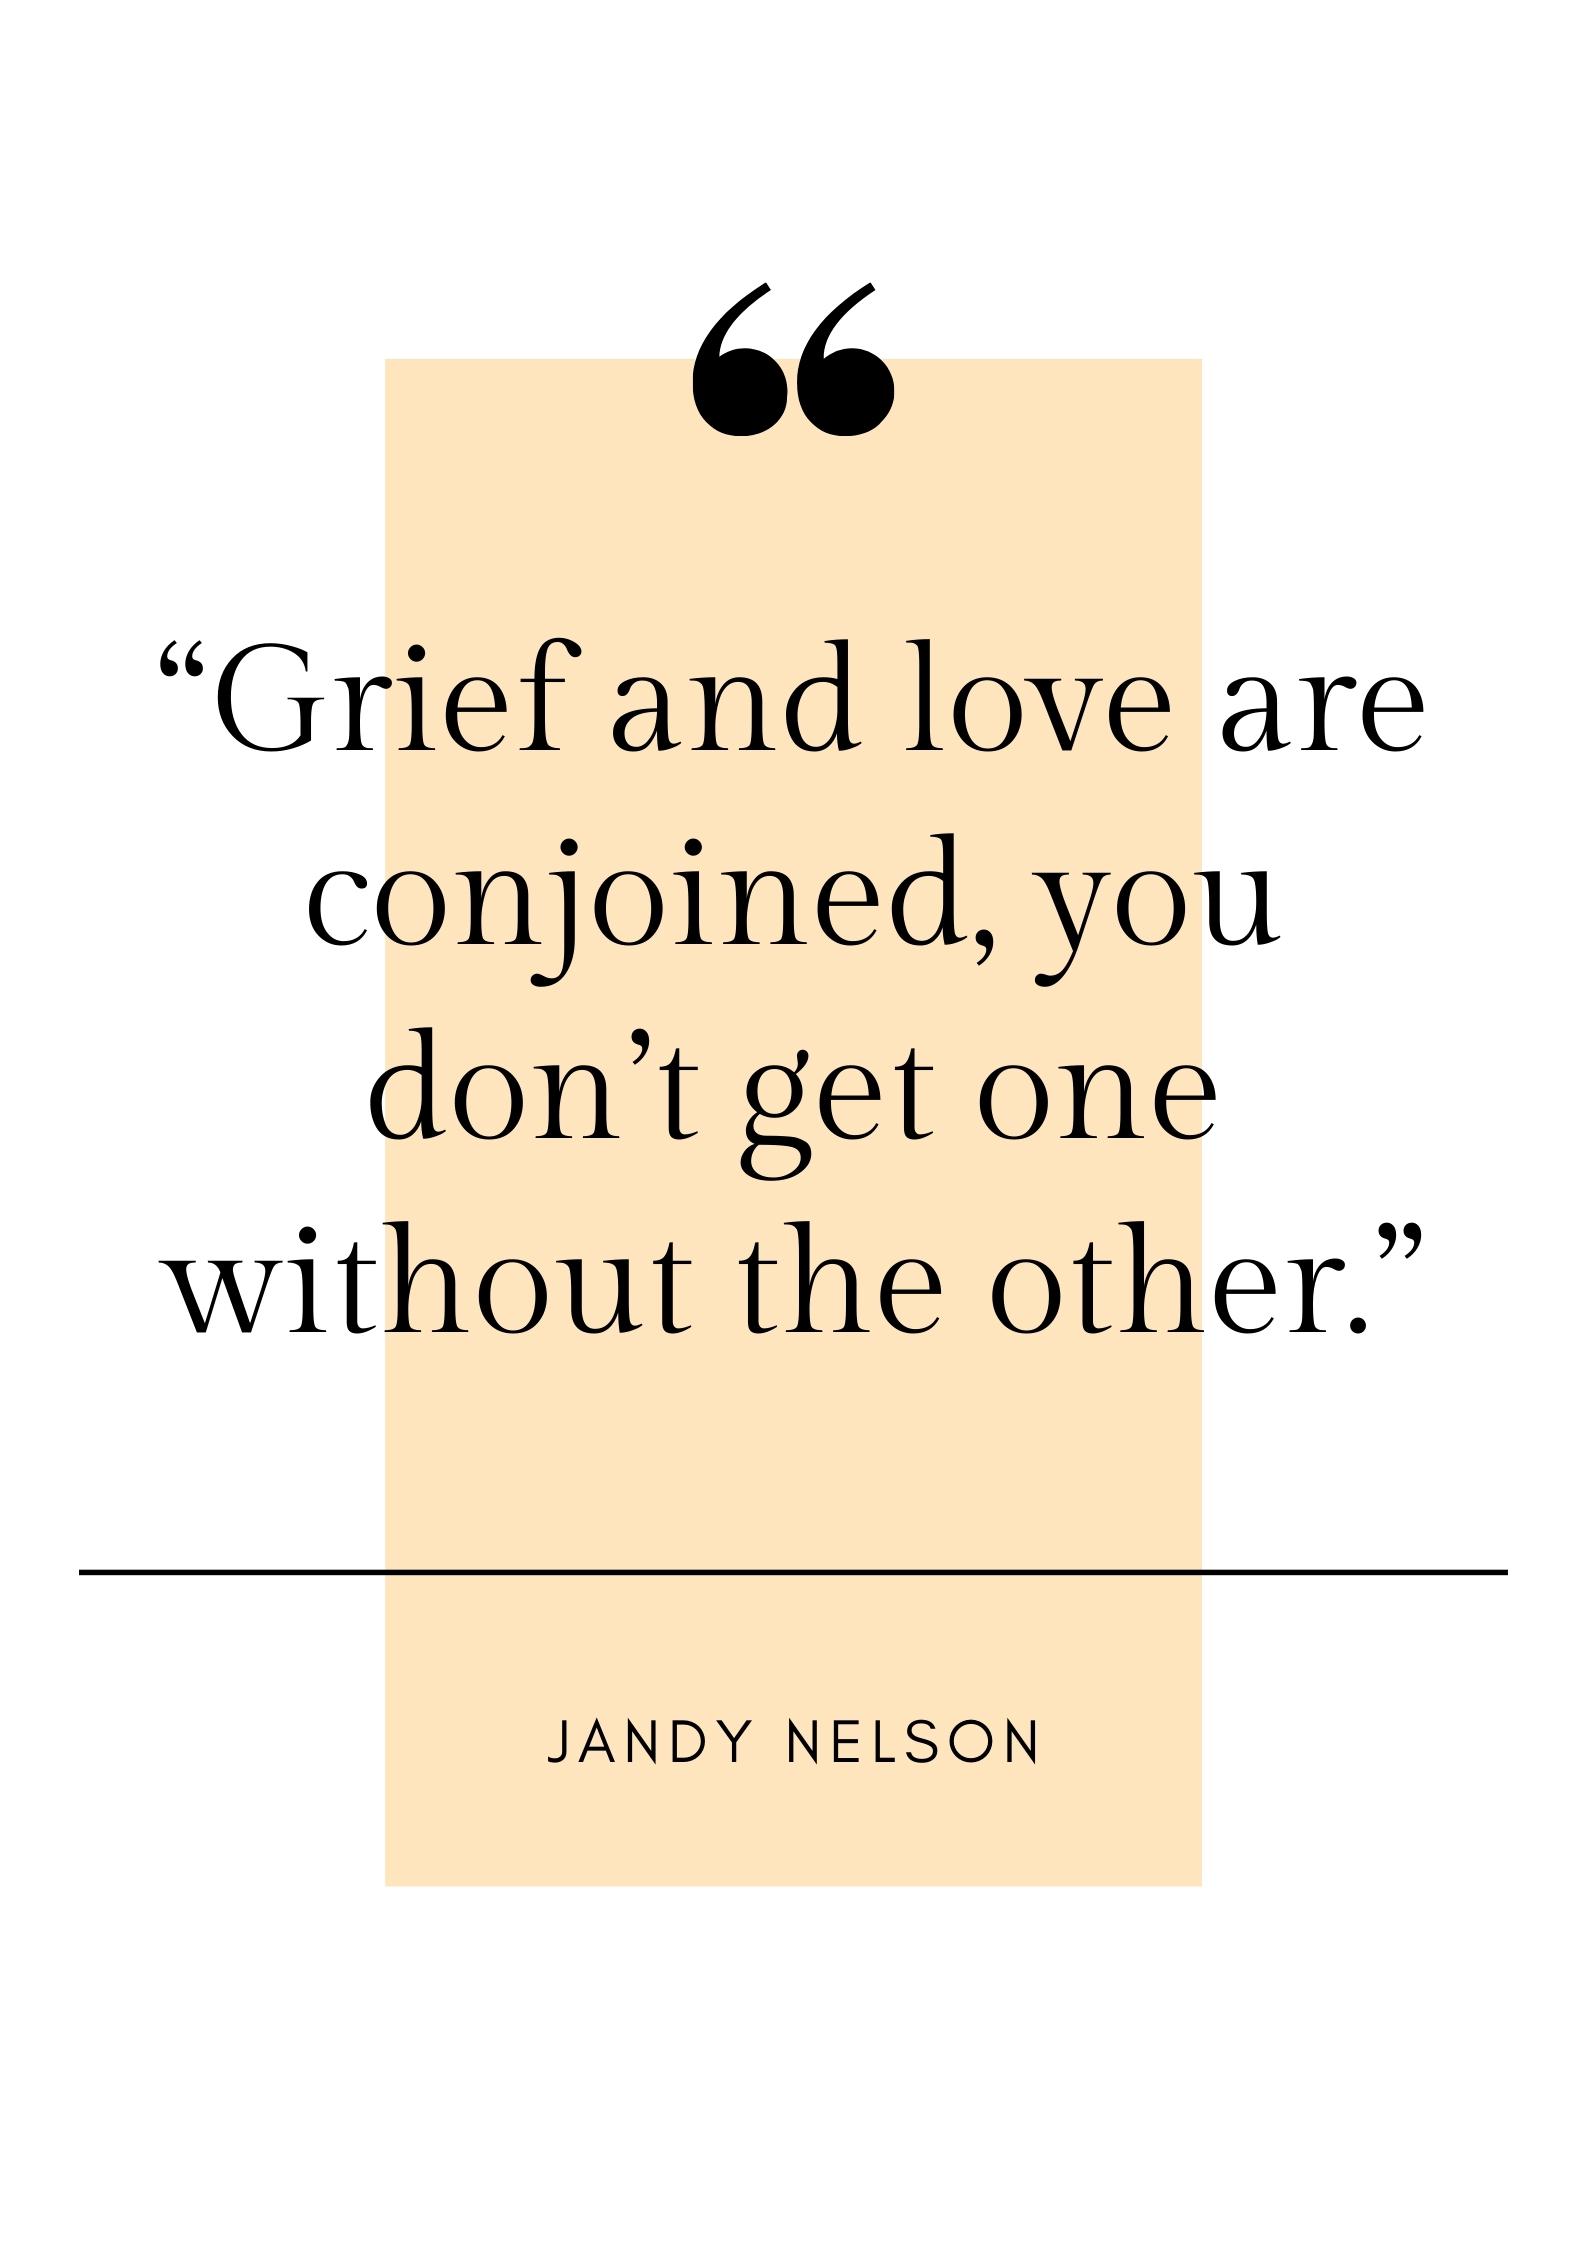 jandy nelson quote